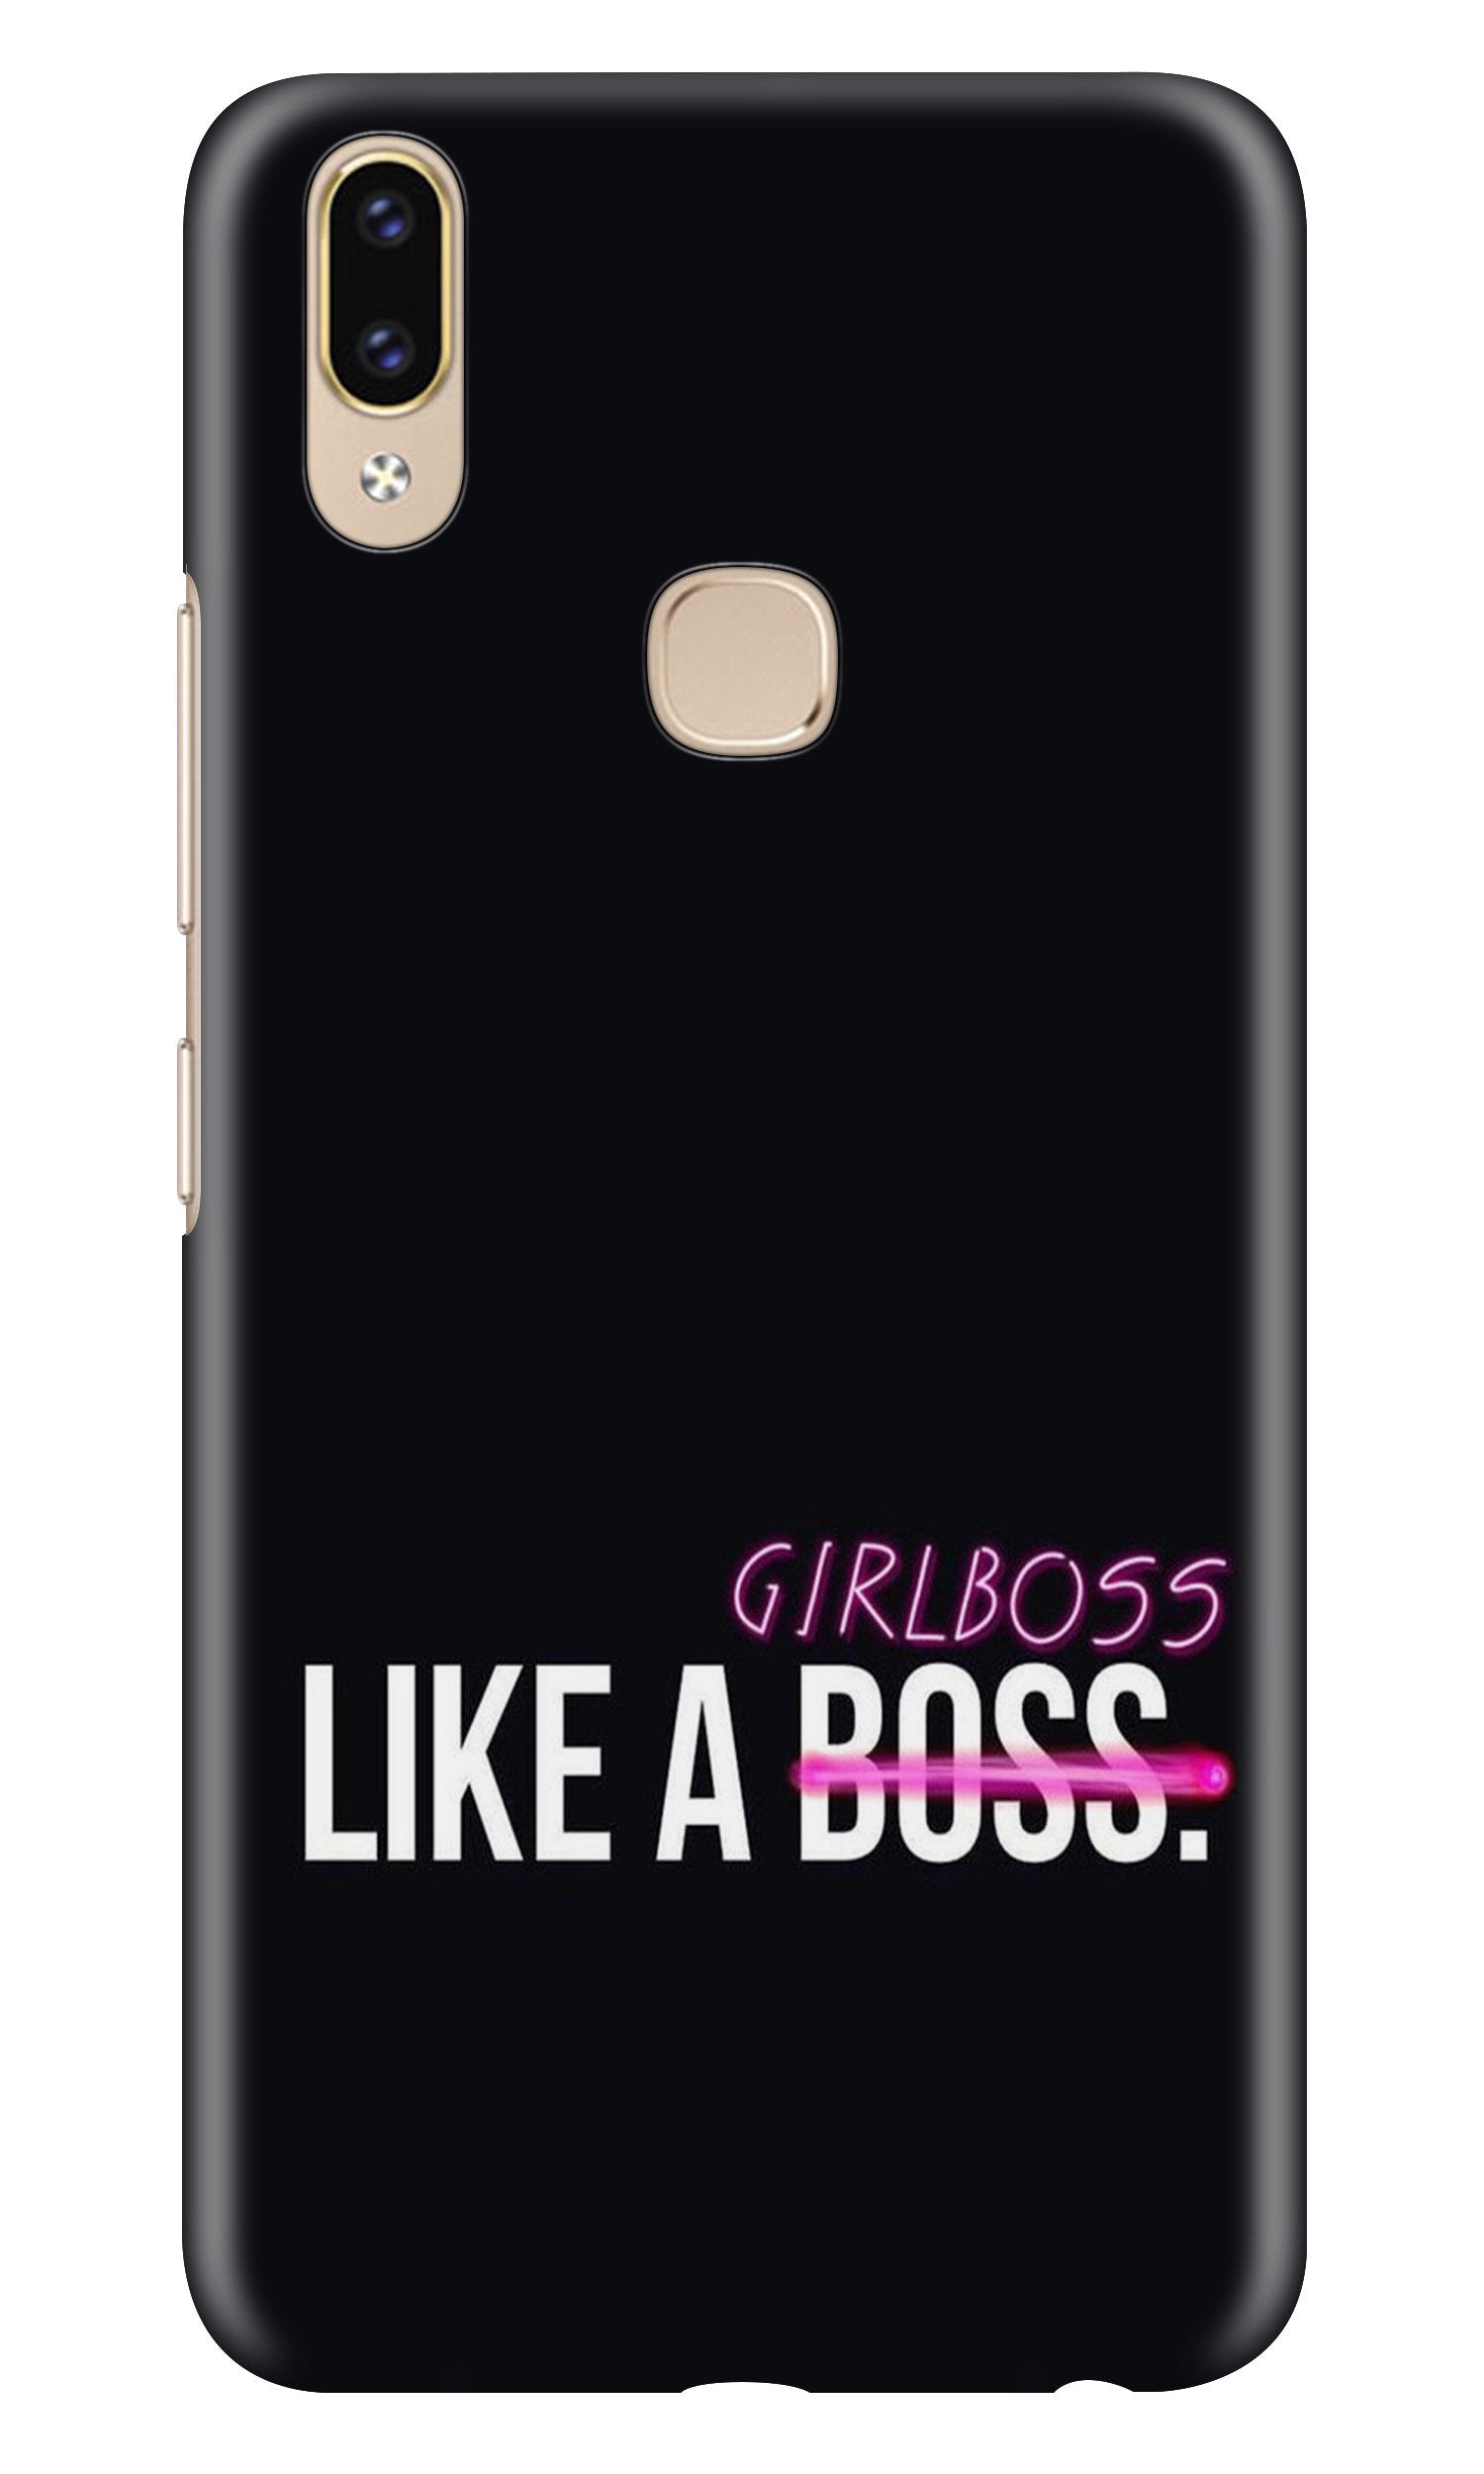 Like a Girl Boss Case for Asus Zenfone Max Pro M2 (Design No. 265)